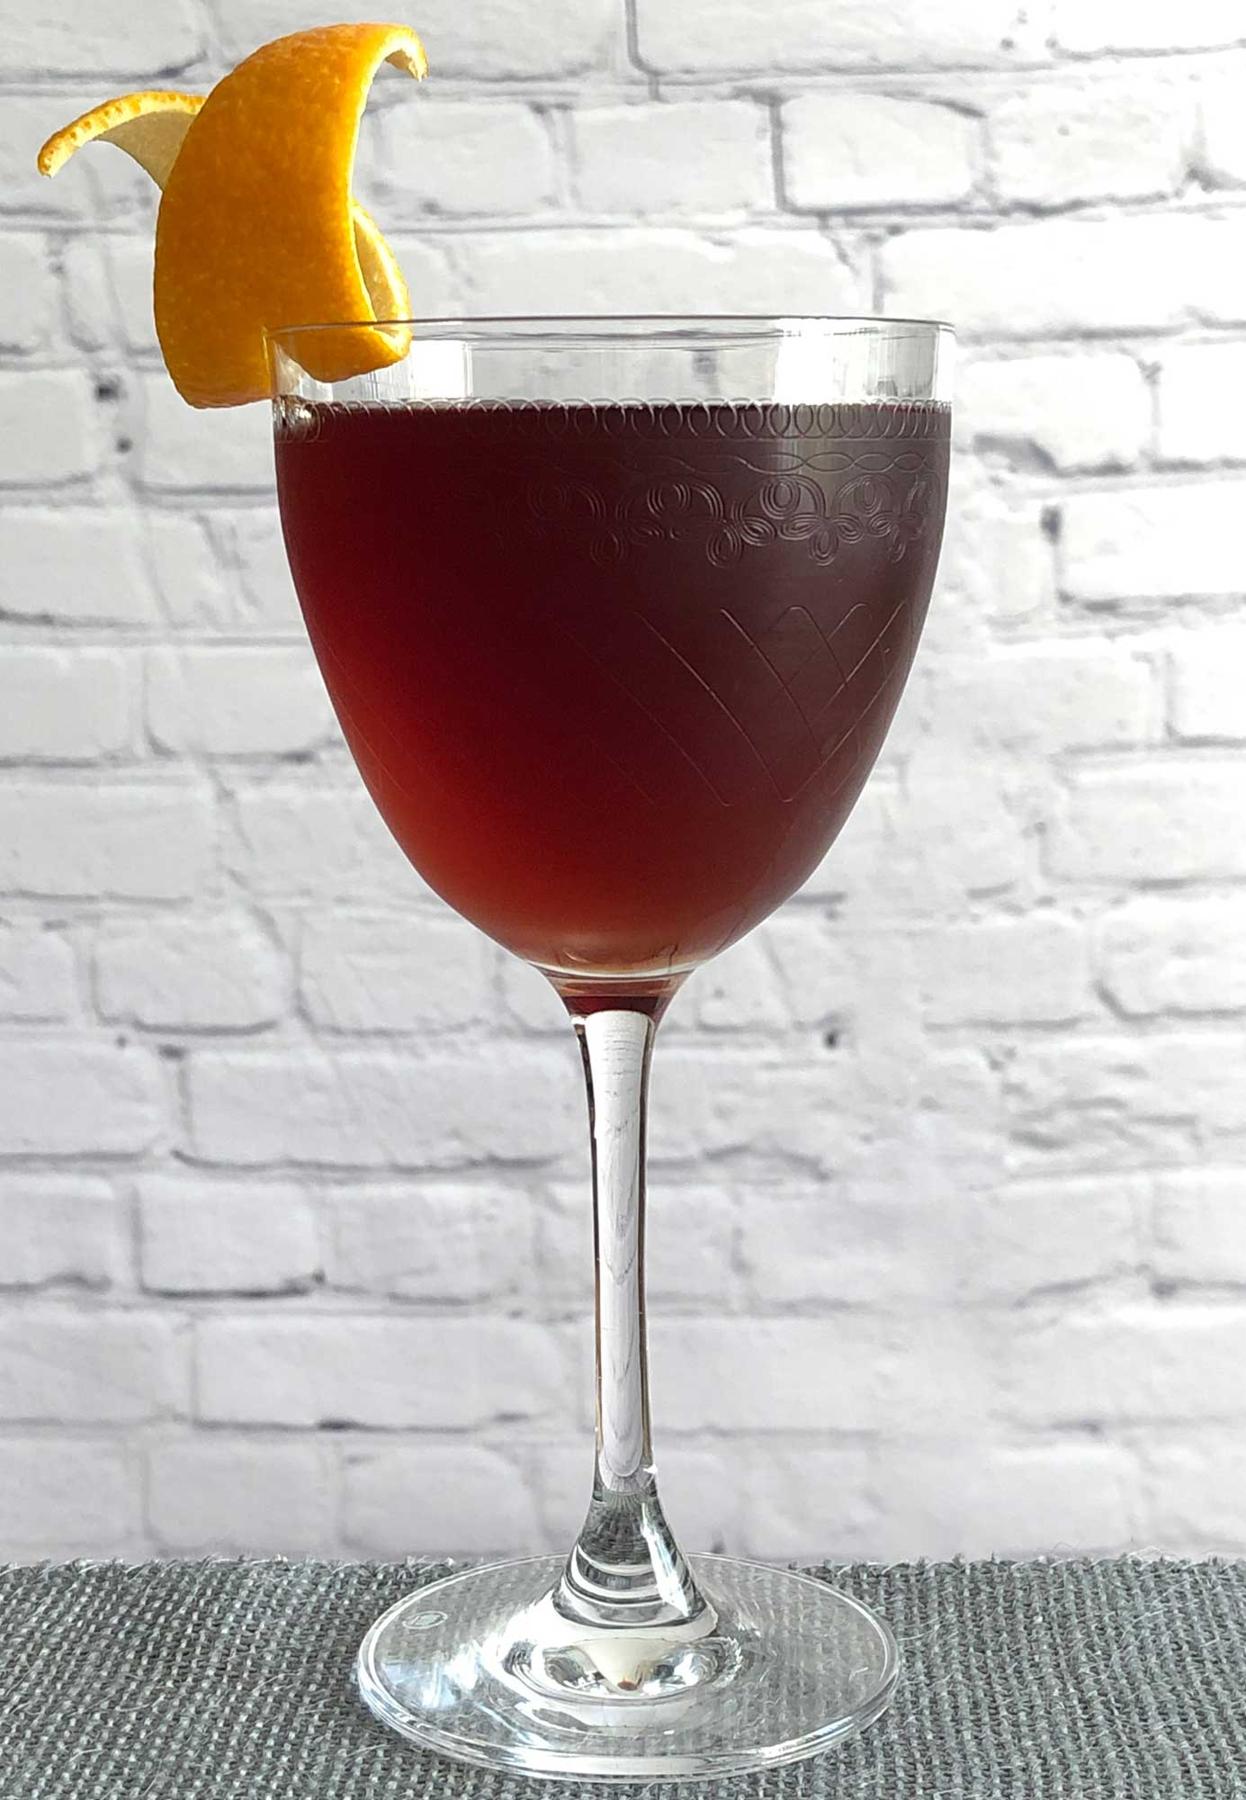 An example of the Dessert Manhattan, the mixed drink (drink) featuring bourbon whiskey, Cocchi Dopo Teatro Vermouth Amaro, and orange twist; photo by Lee Edwards